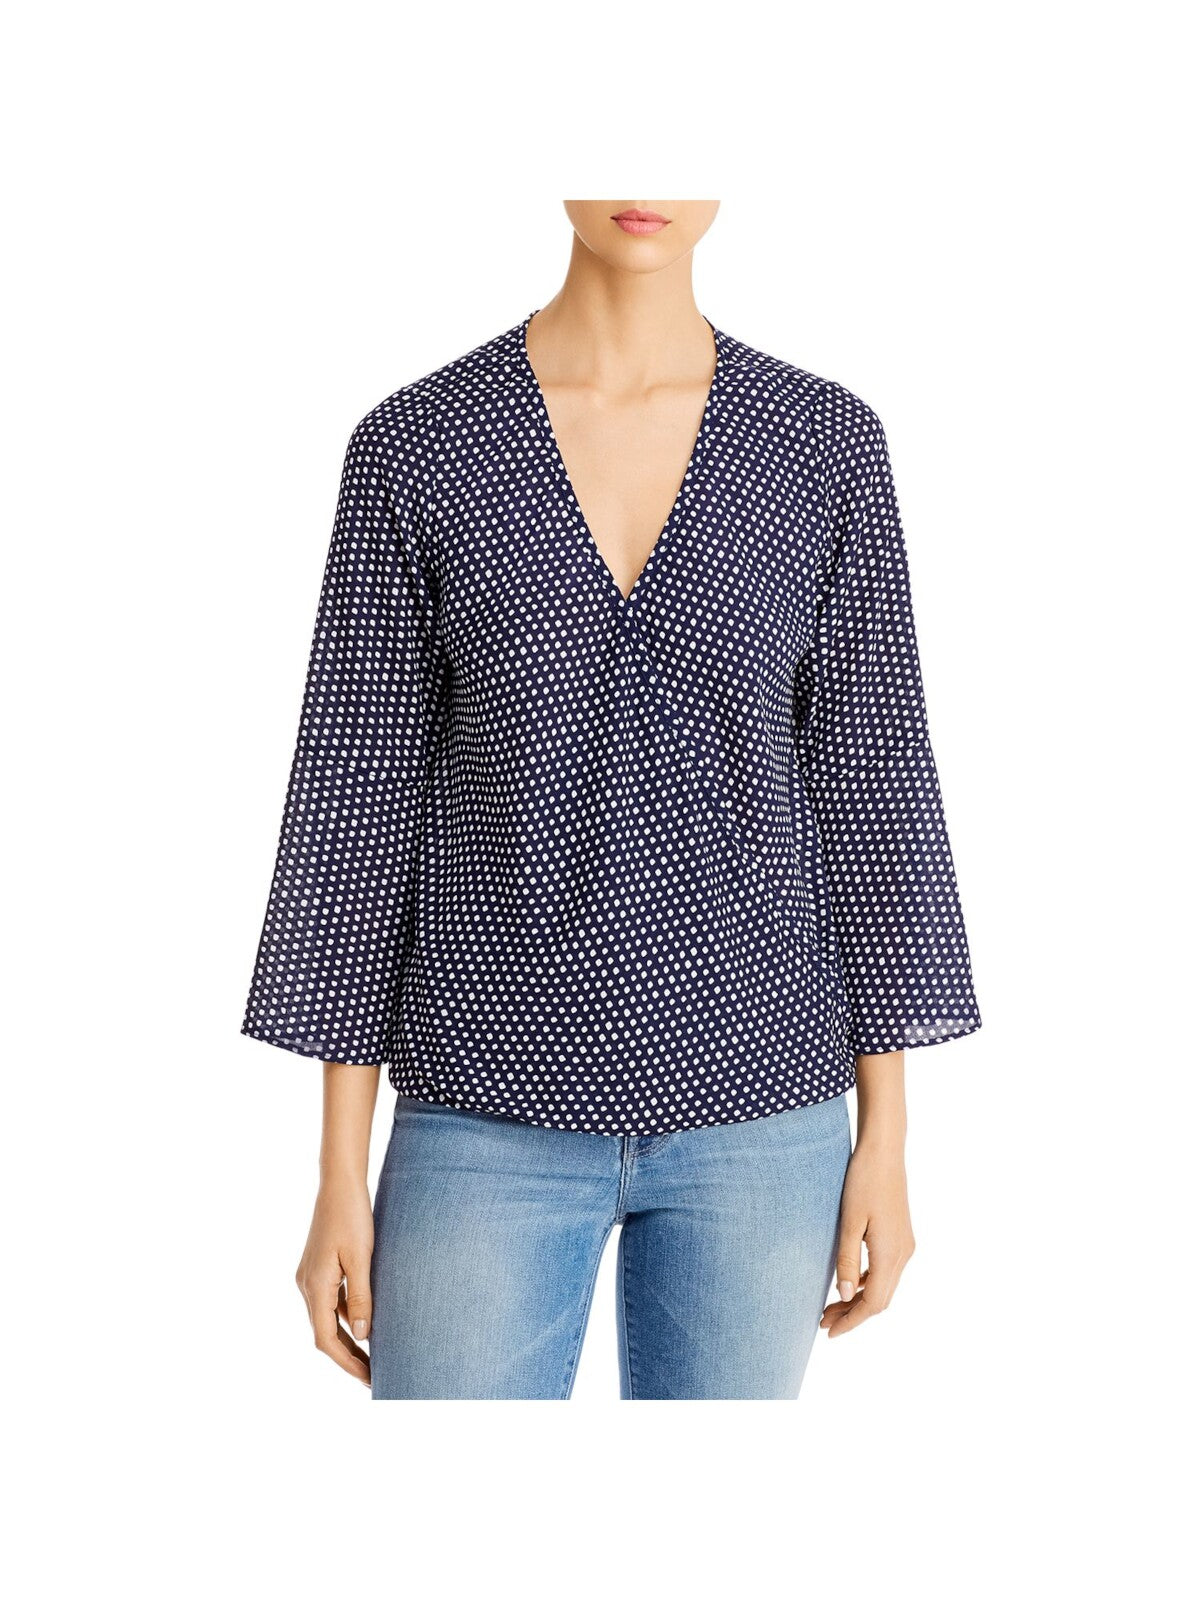 STATUS BY CHENAULT Womens Navy Printed Bell Sleeve Surplice Neckline Wear To Work Faux Wrap Top XS